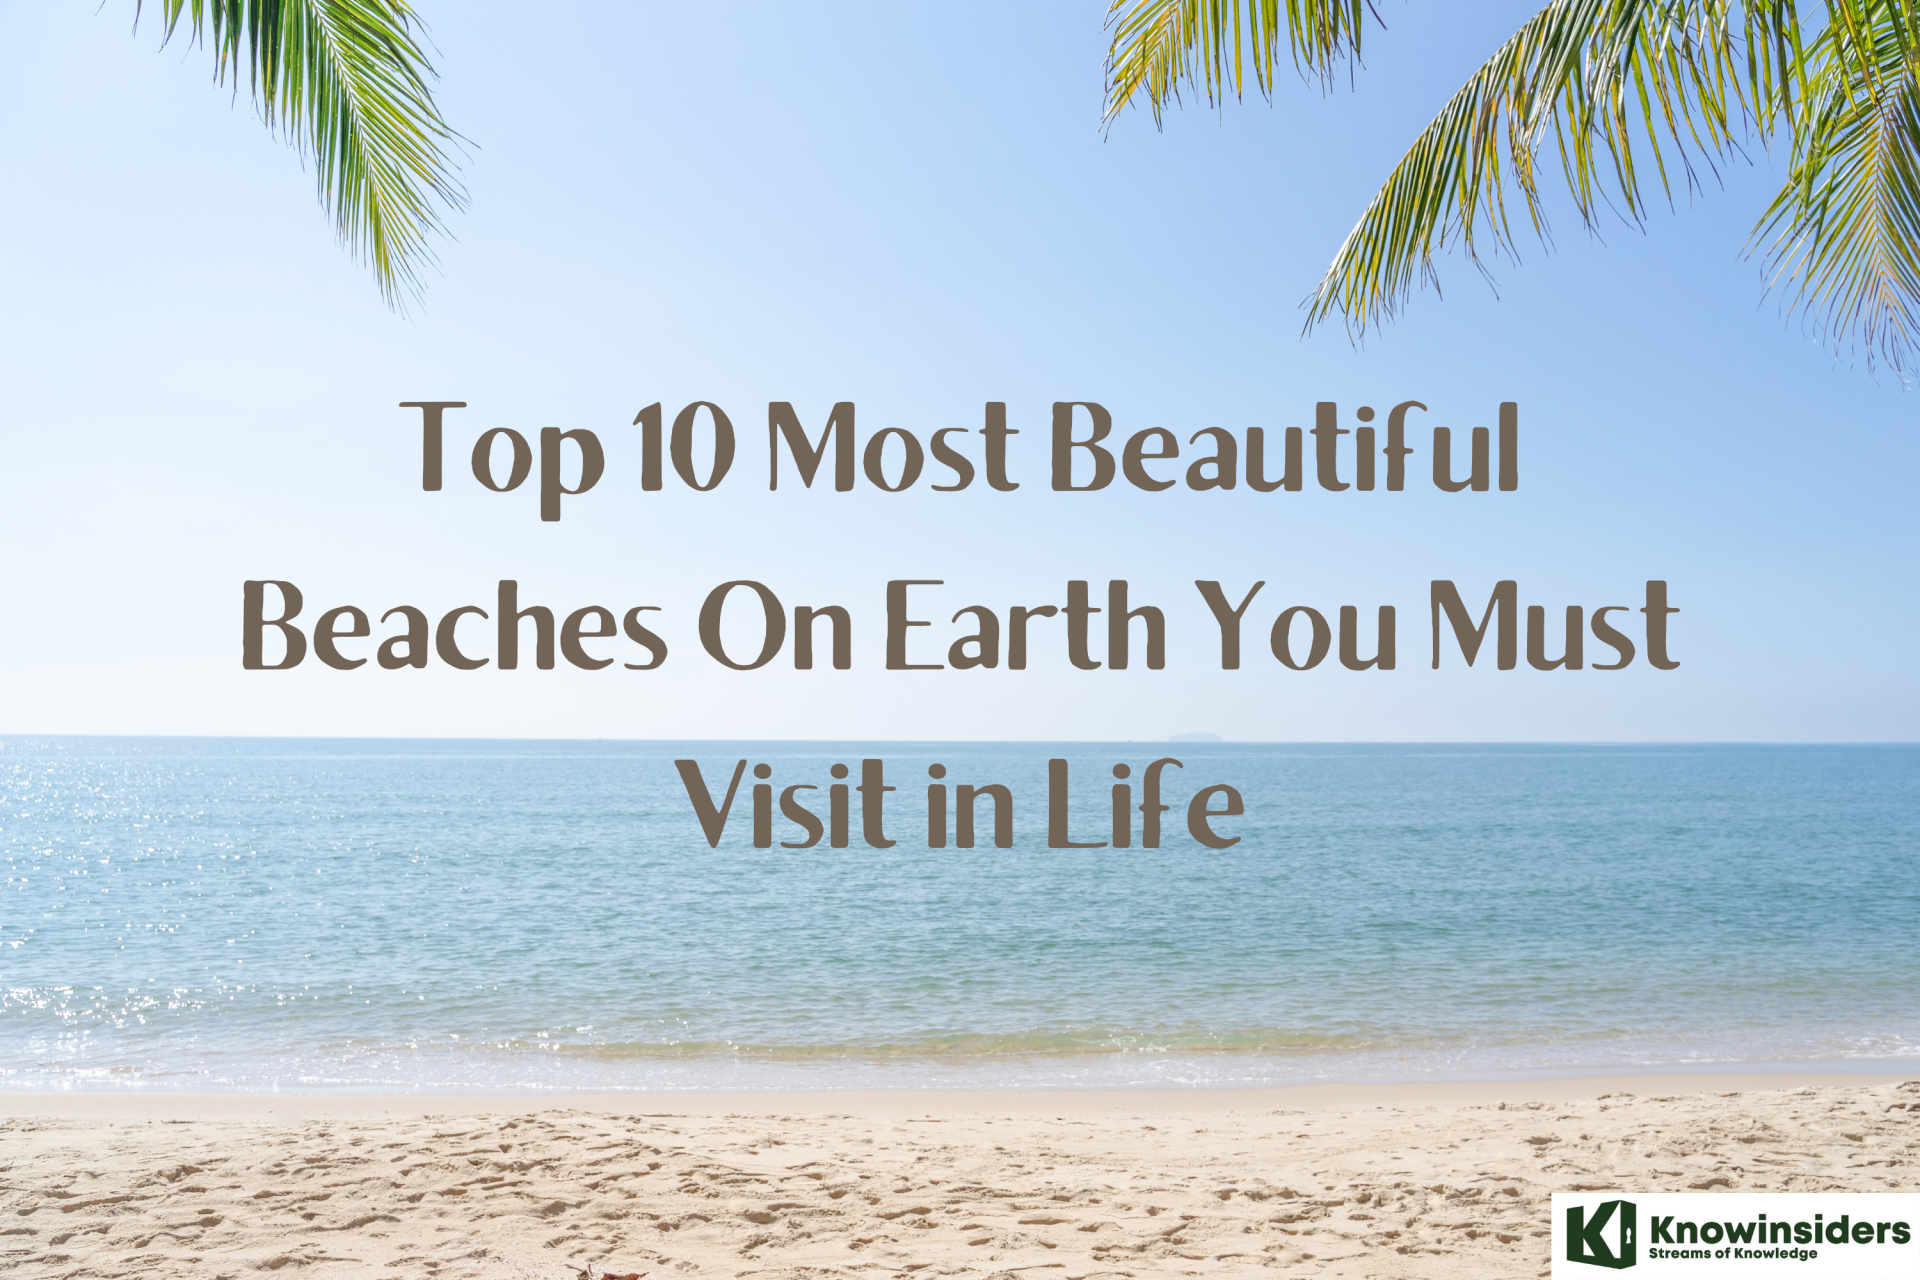 Top 10 Most Beautiful Beaches On Earth You Must Visit